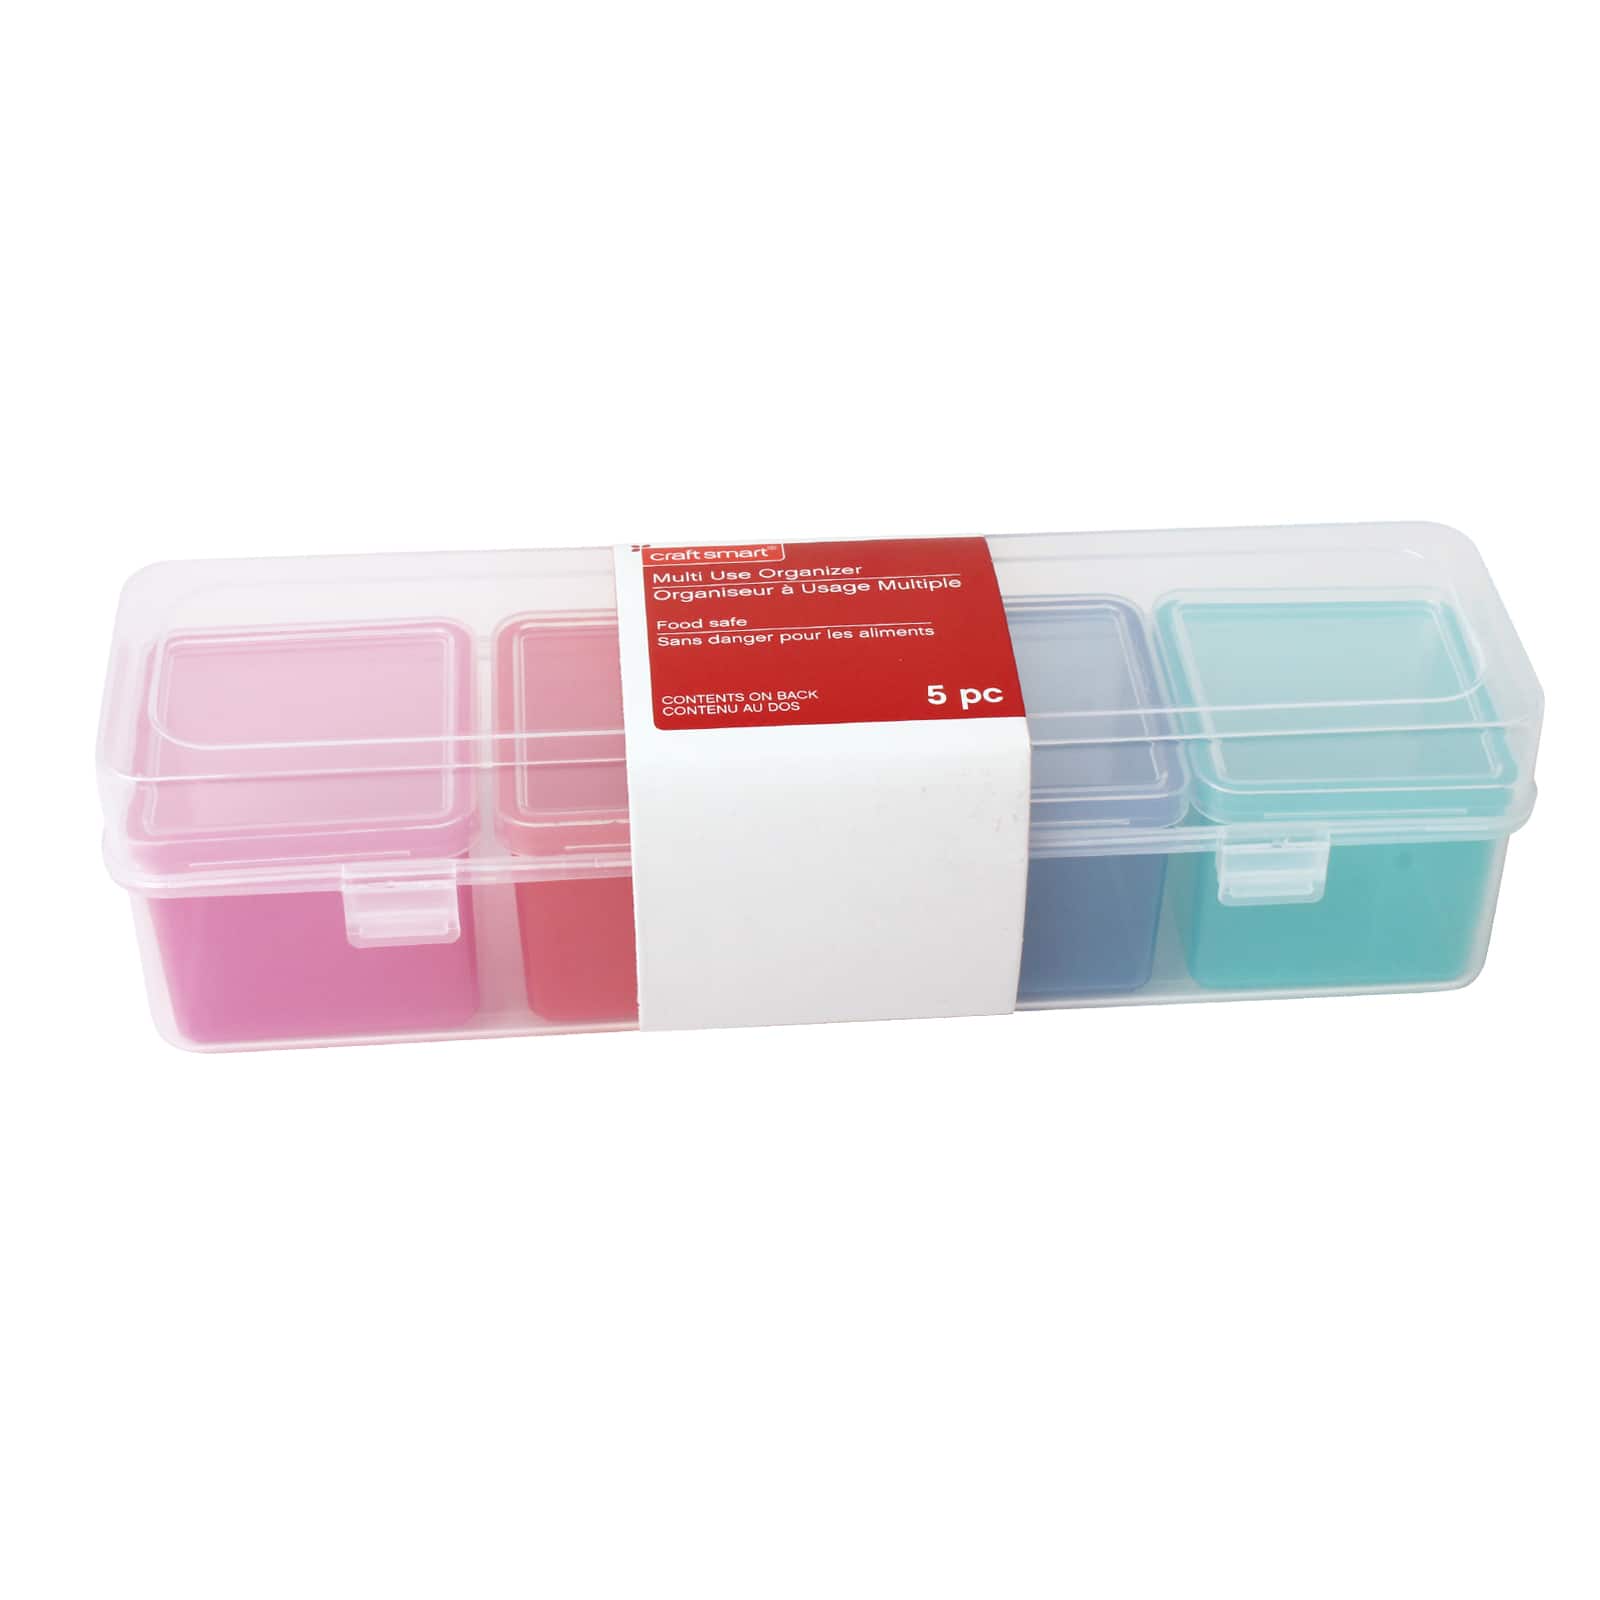 2 pcs Fly Tying Beads Container Plastic Box 12 Compartments Fly Fishing Box